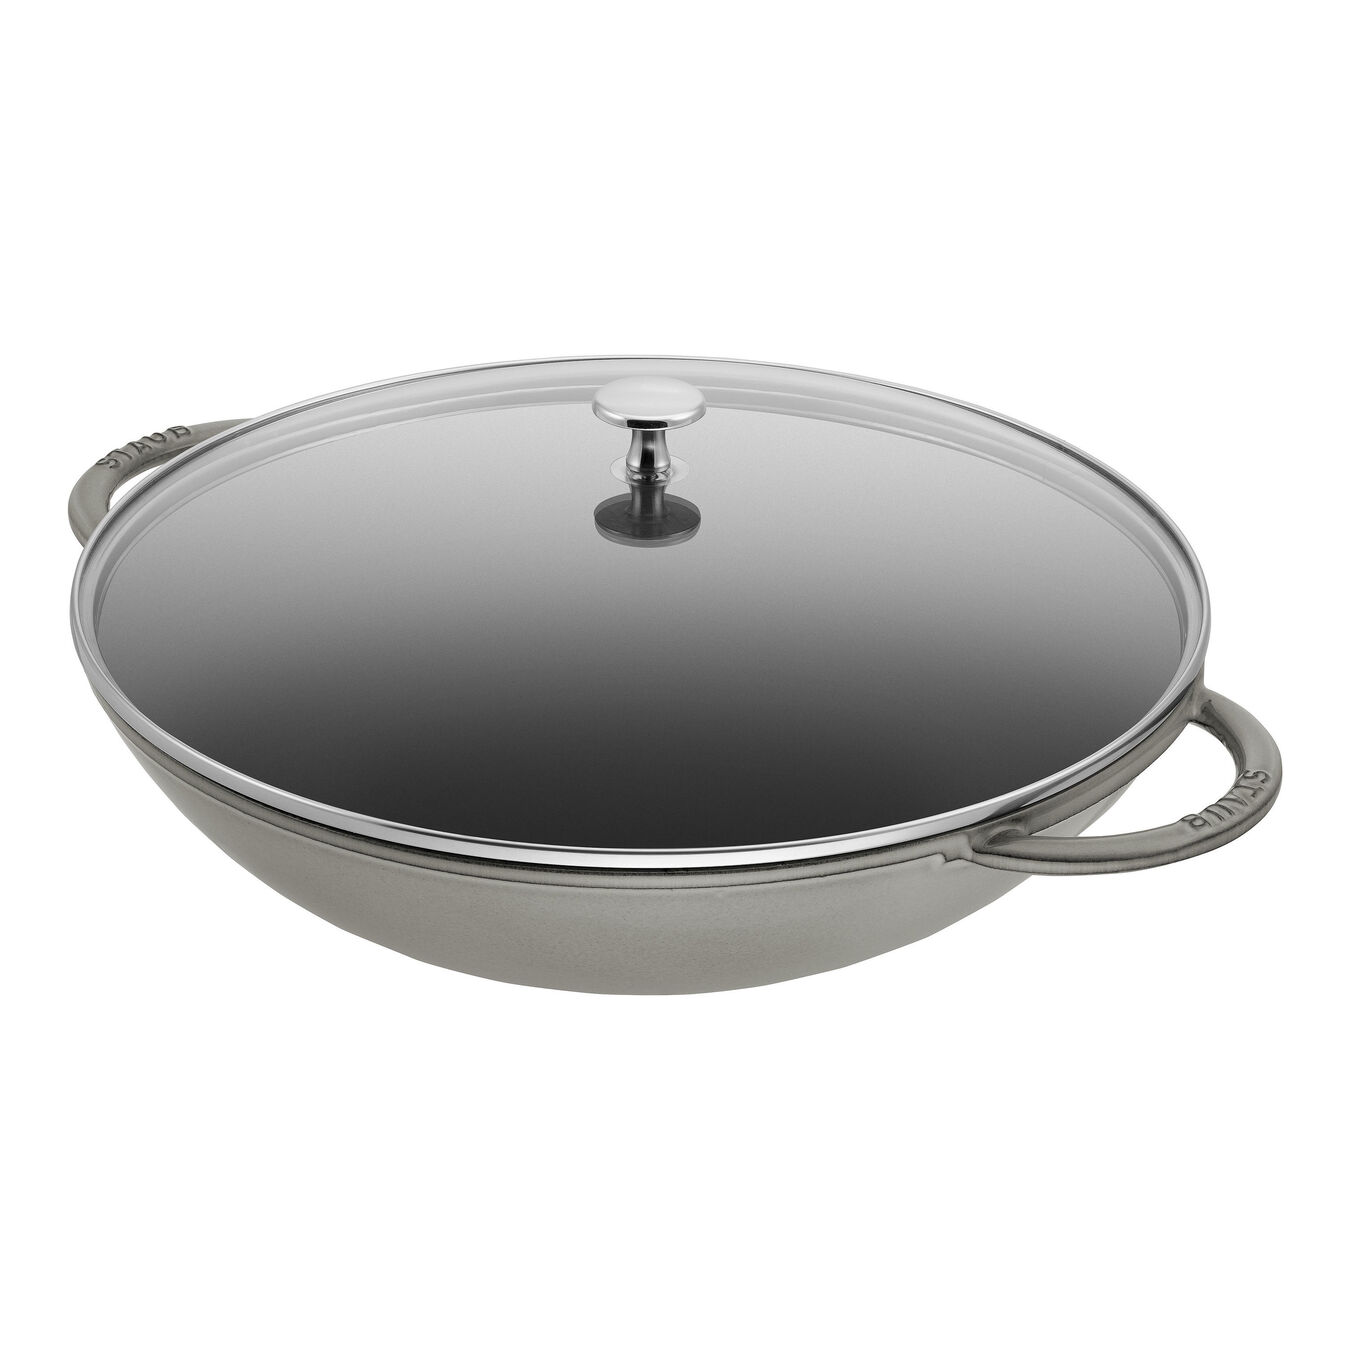 37 cm Cast iron Wok with glass lid graphite-grey,,large 1